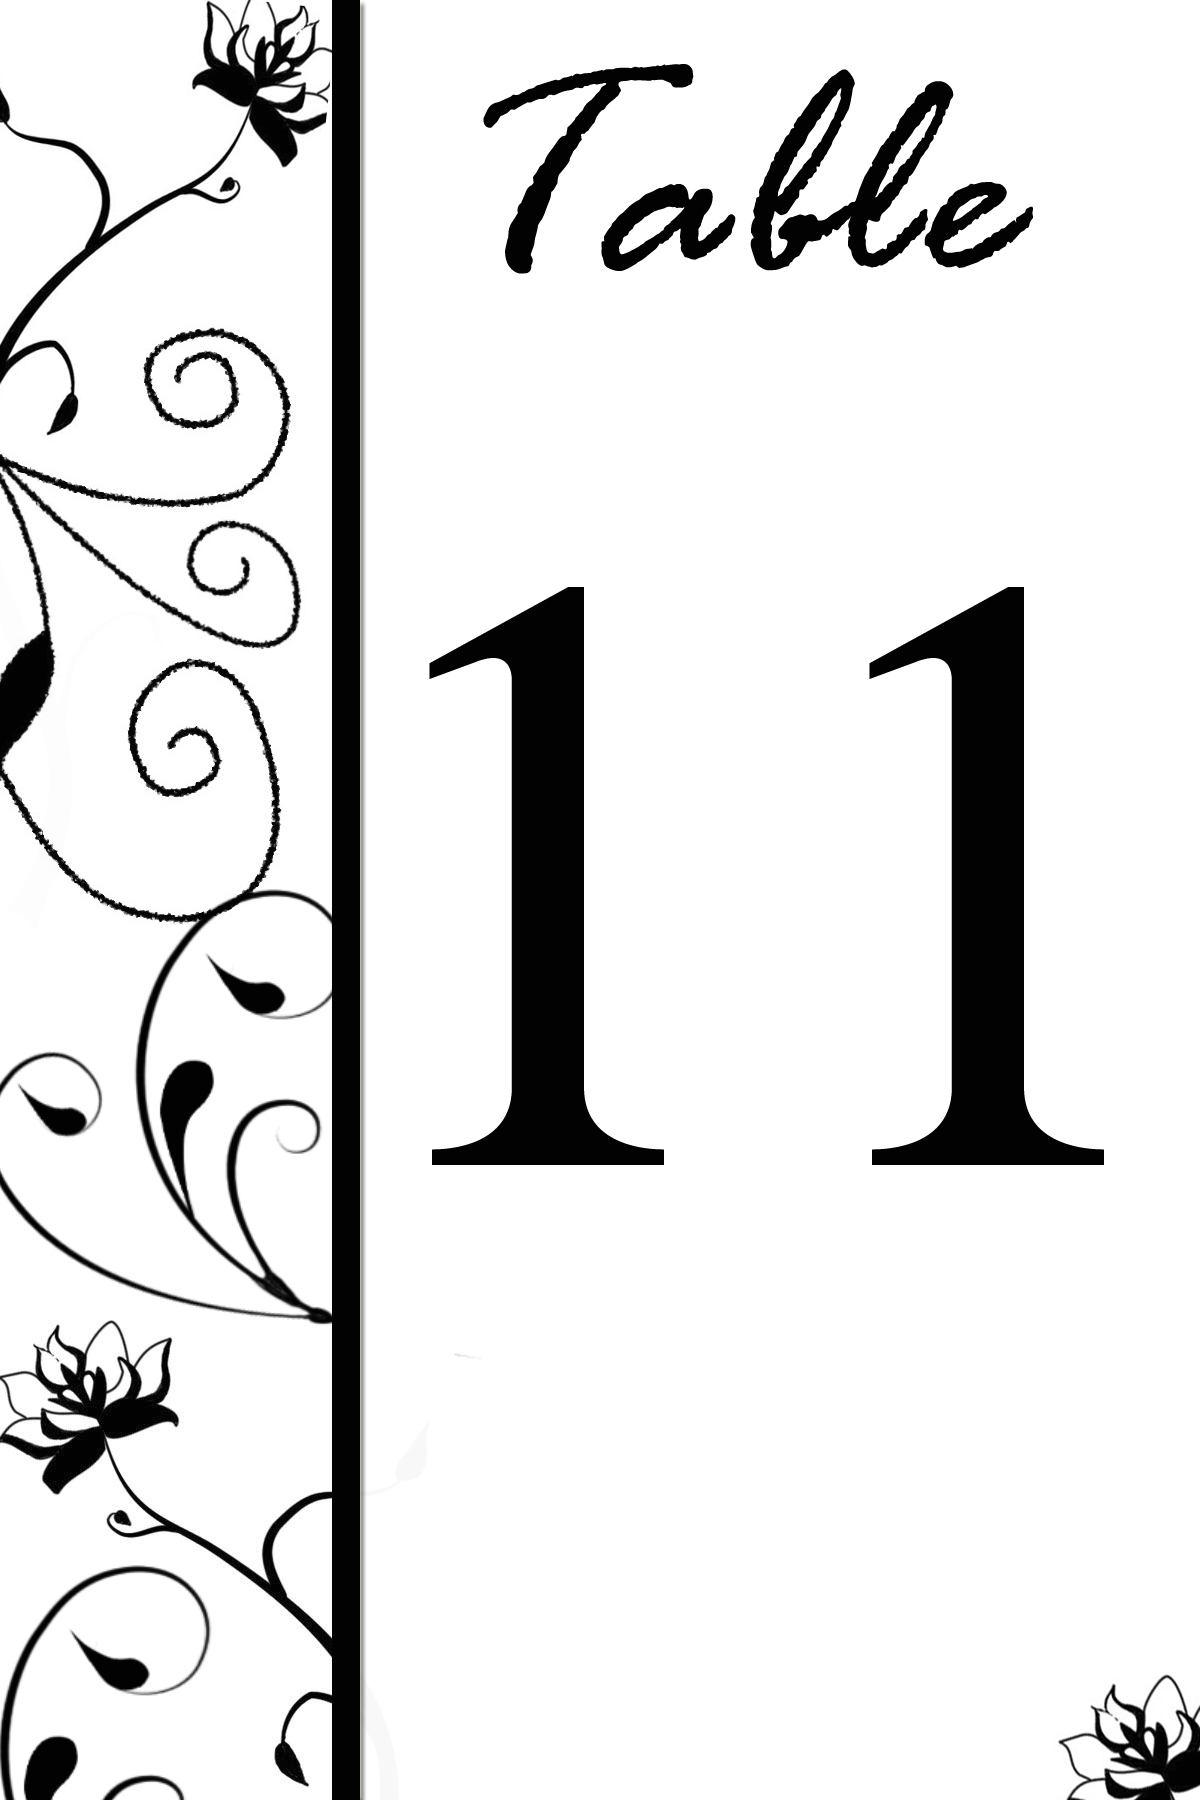 Best Photos of Template Of Number 11 - Number Template Clip Art ...